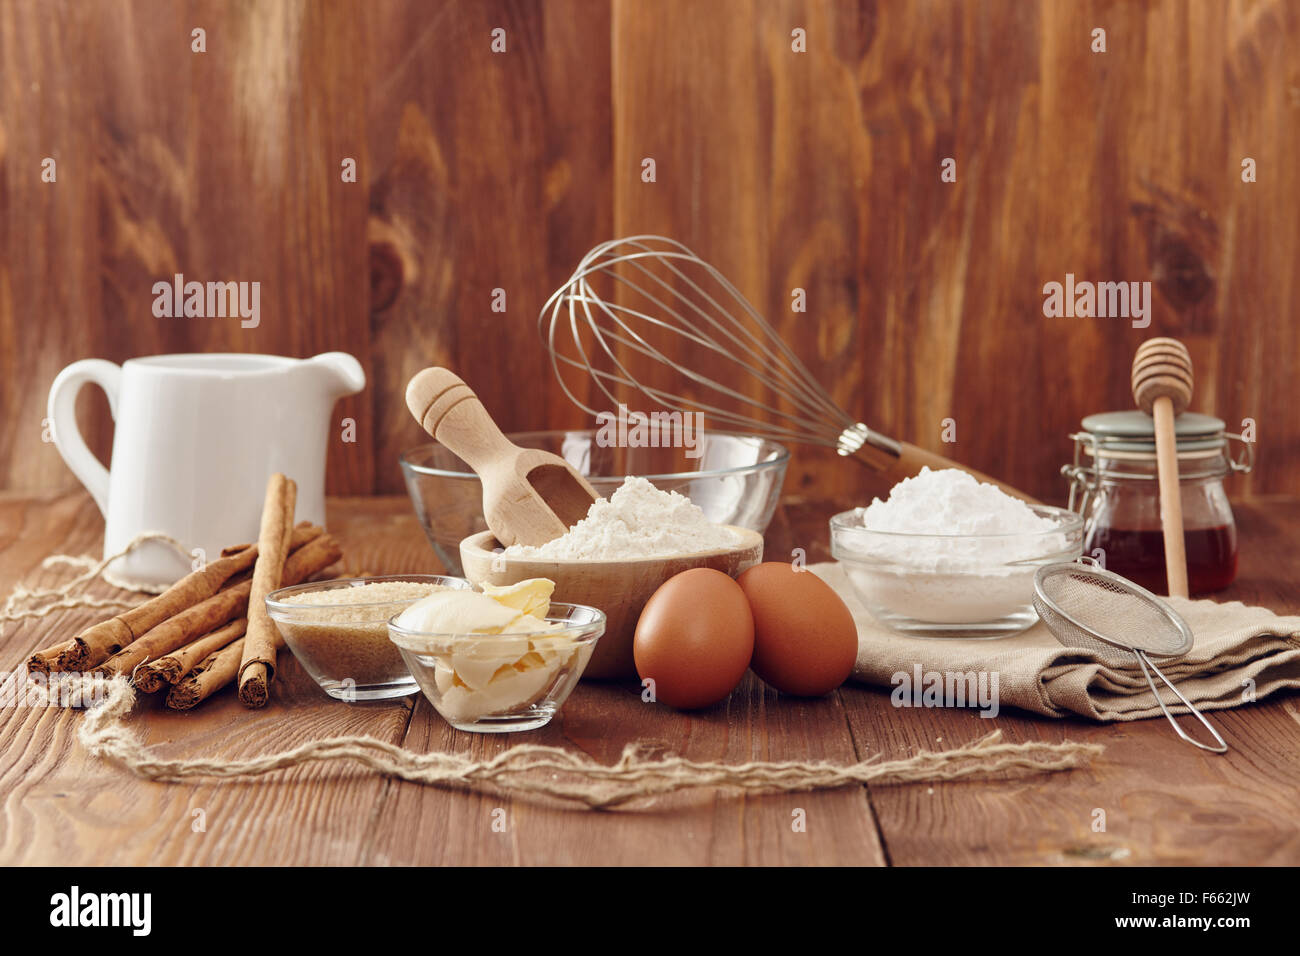 Ingredients to make a cake or a dessert on an aged wooden table Stock Photo